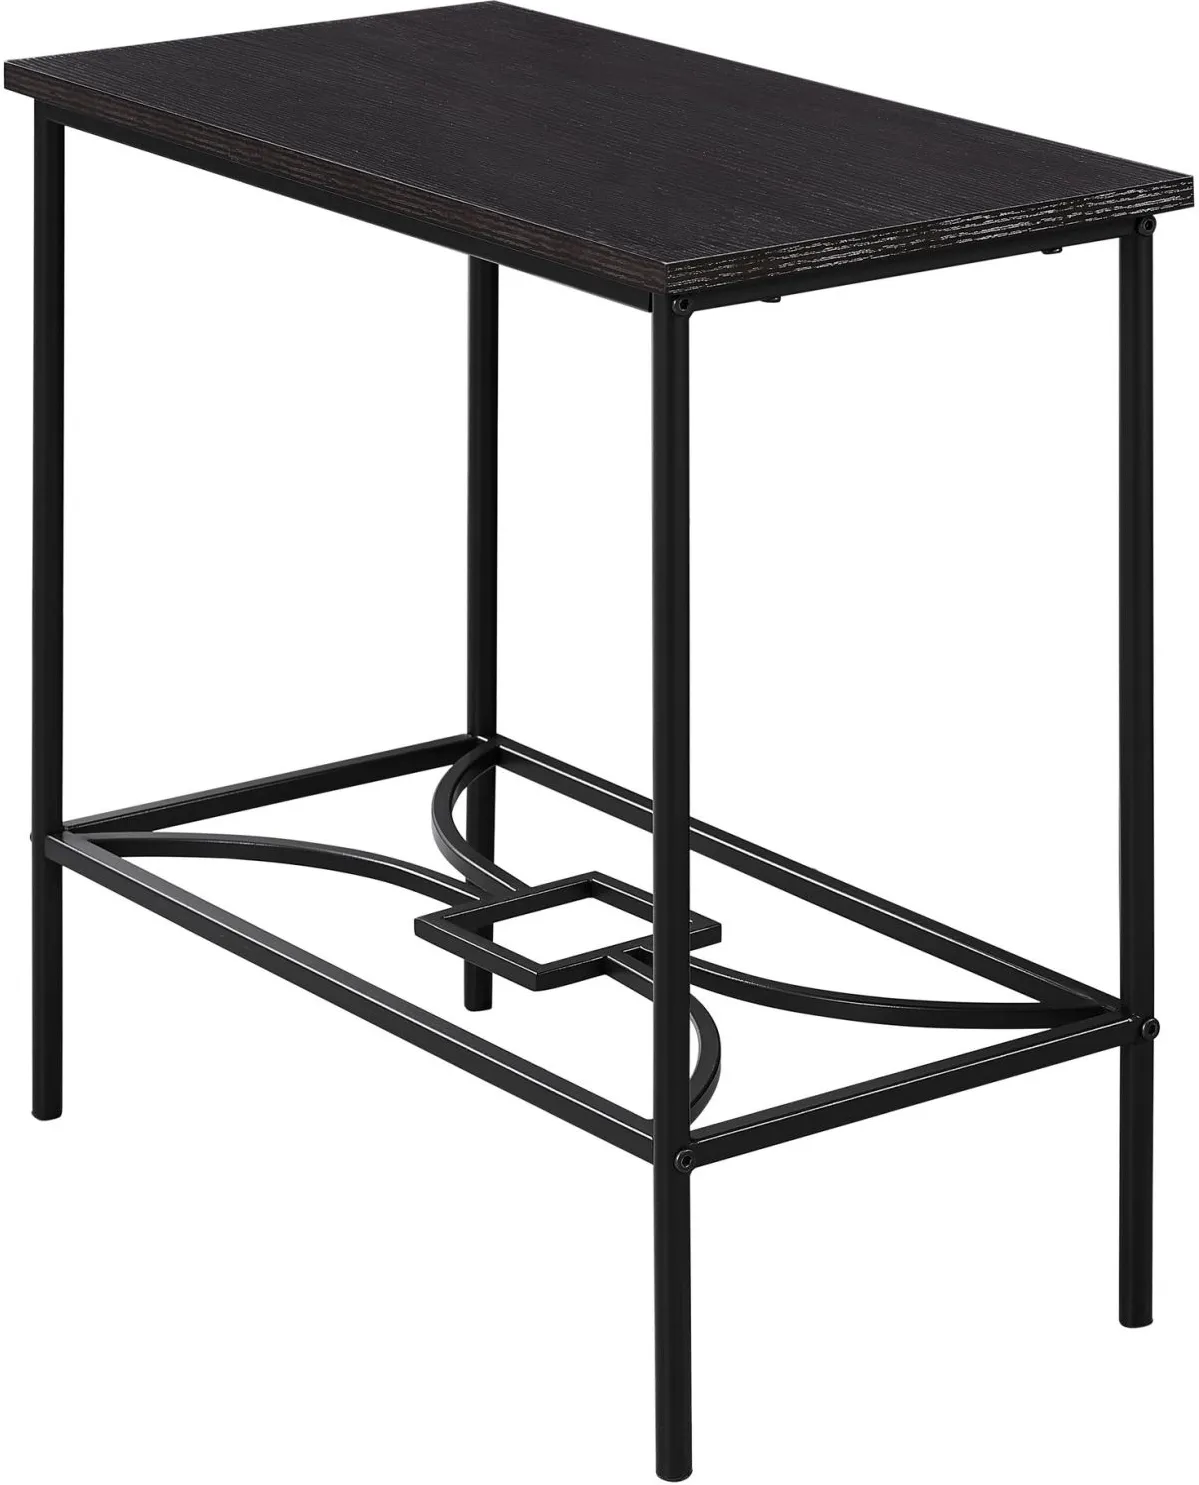 Accent Table, Side, End, Narrow, Small, 2 Tier, Living Room, Bedroom, Metal, Laminate, Brown, Black, Contemporary, Modern